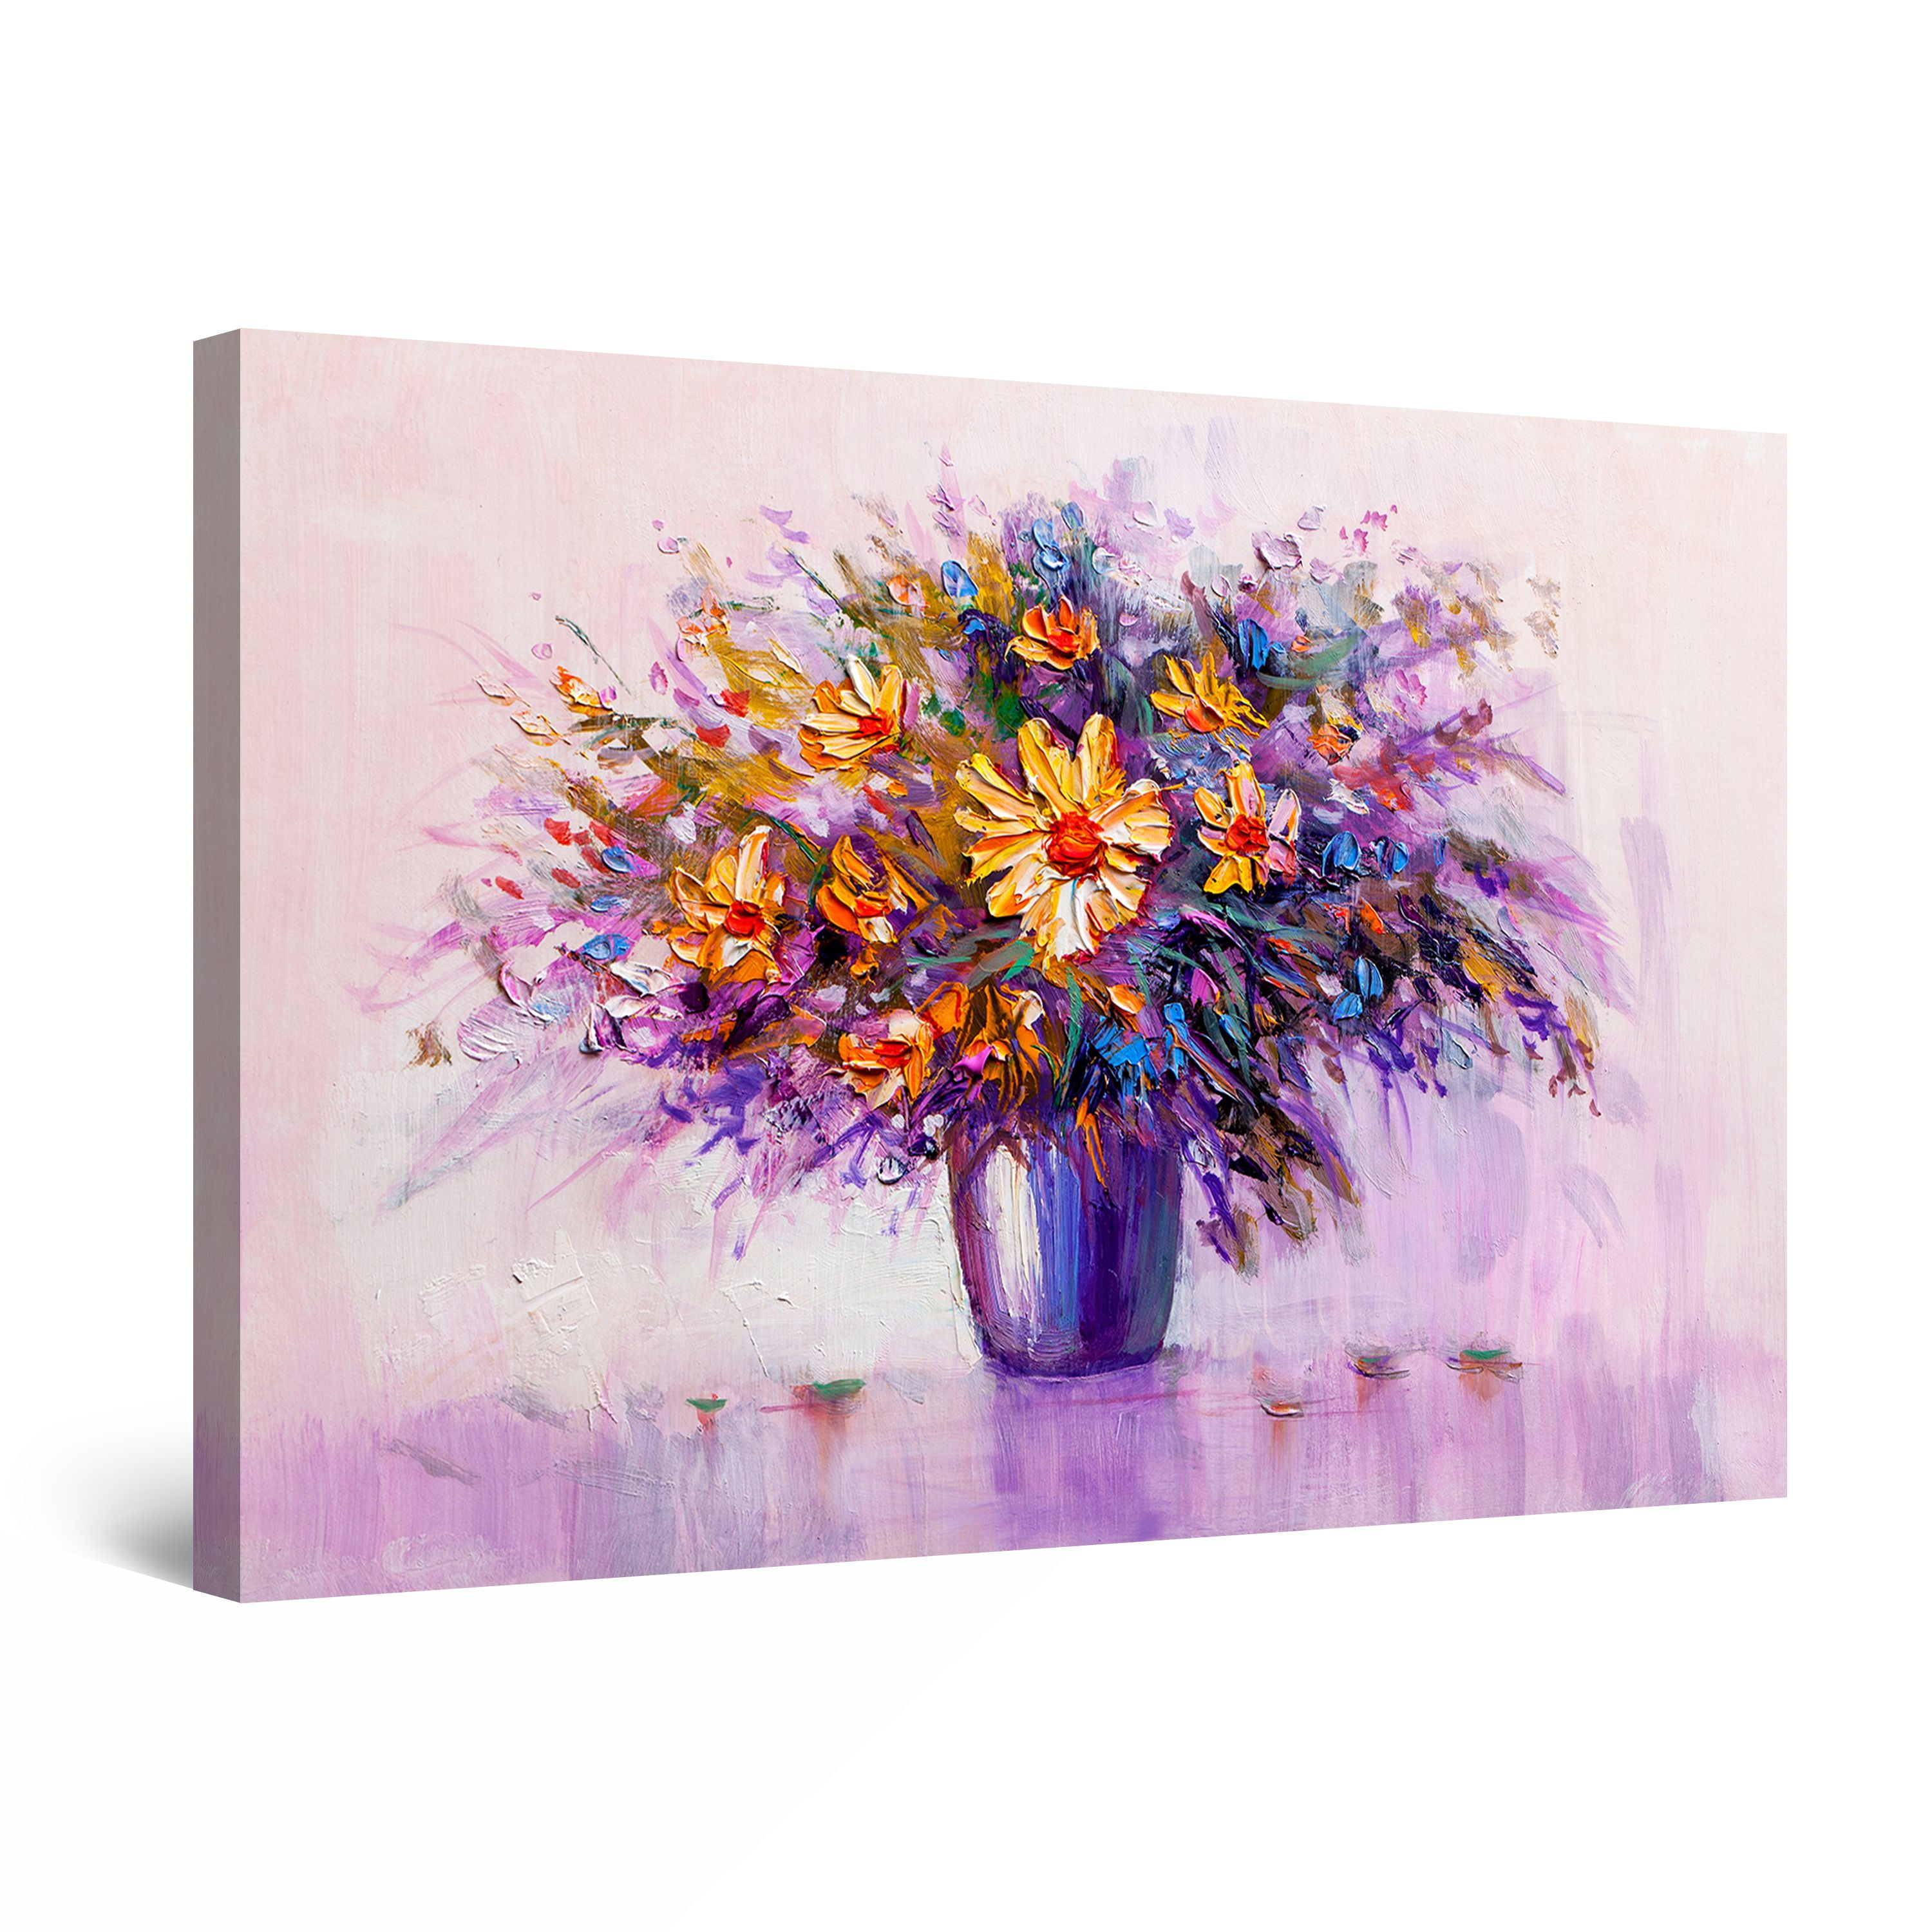 Startonight Canvas Wall Art Abstract Yellow Flowers in